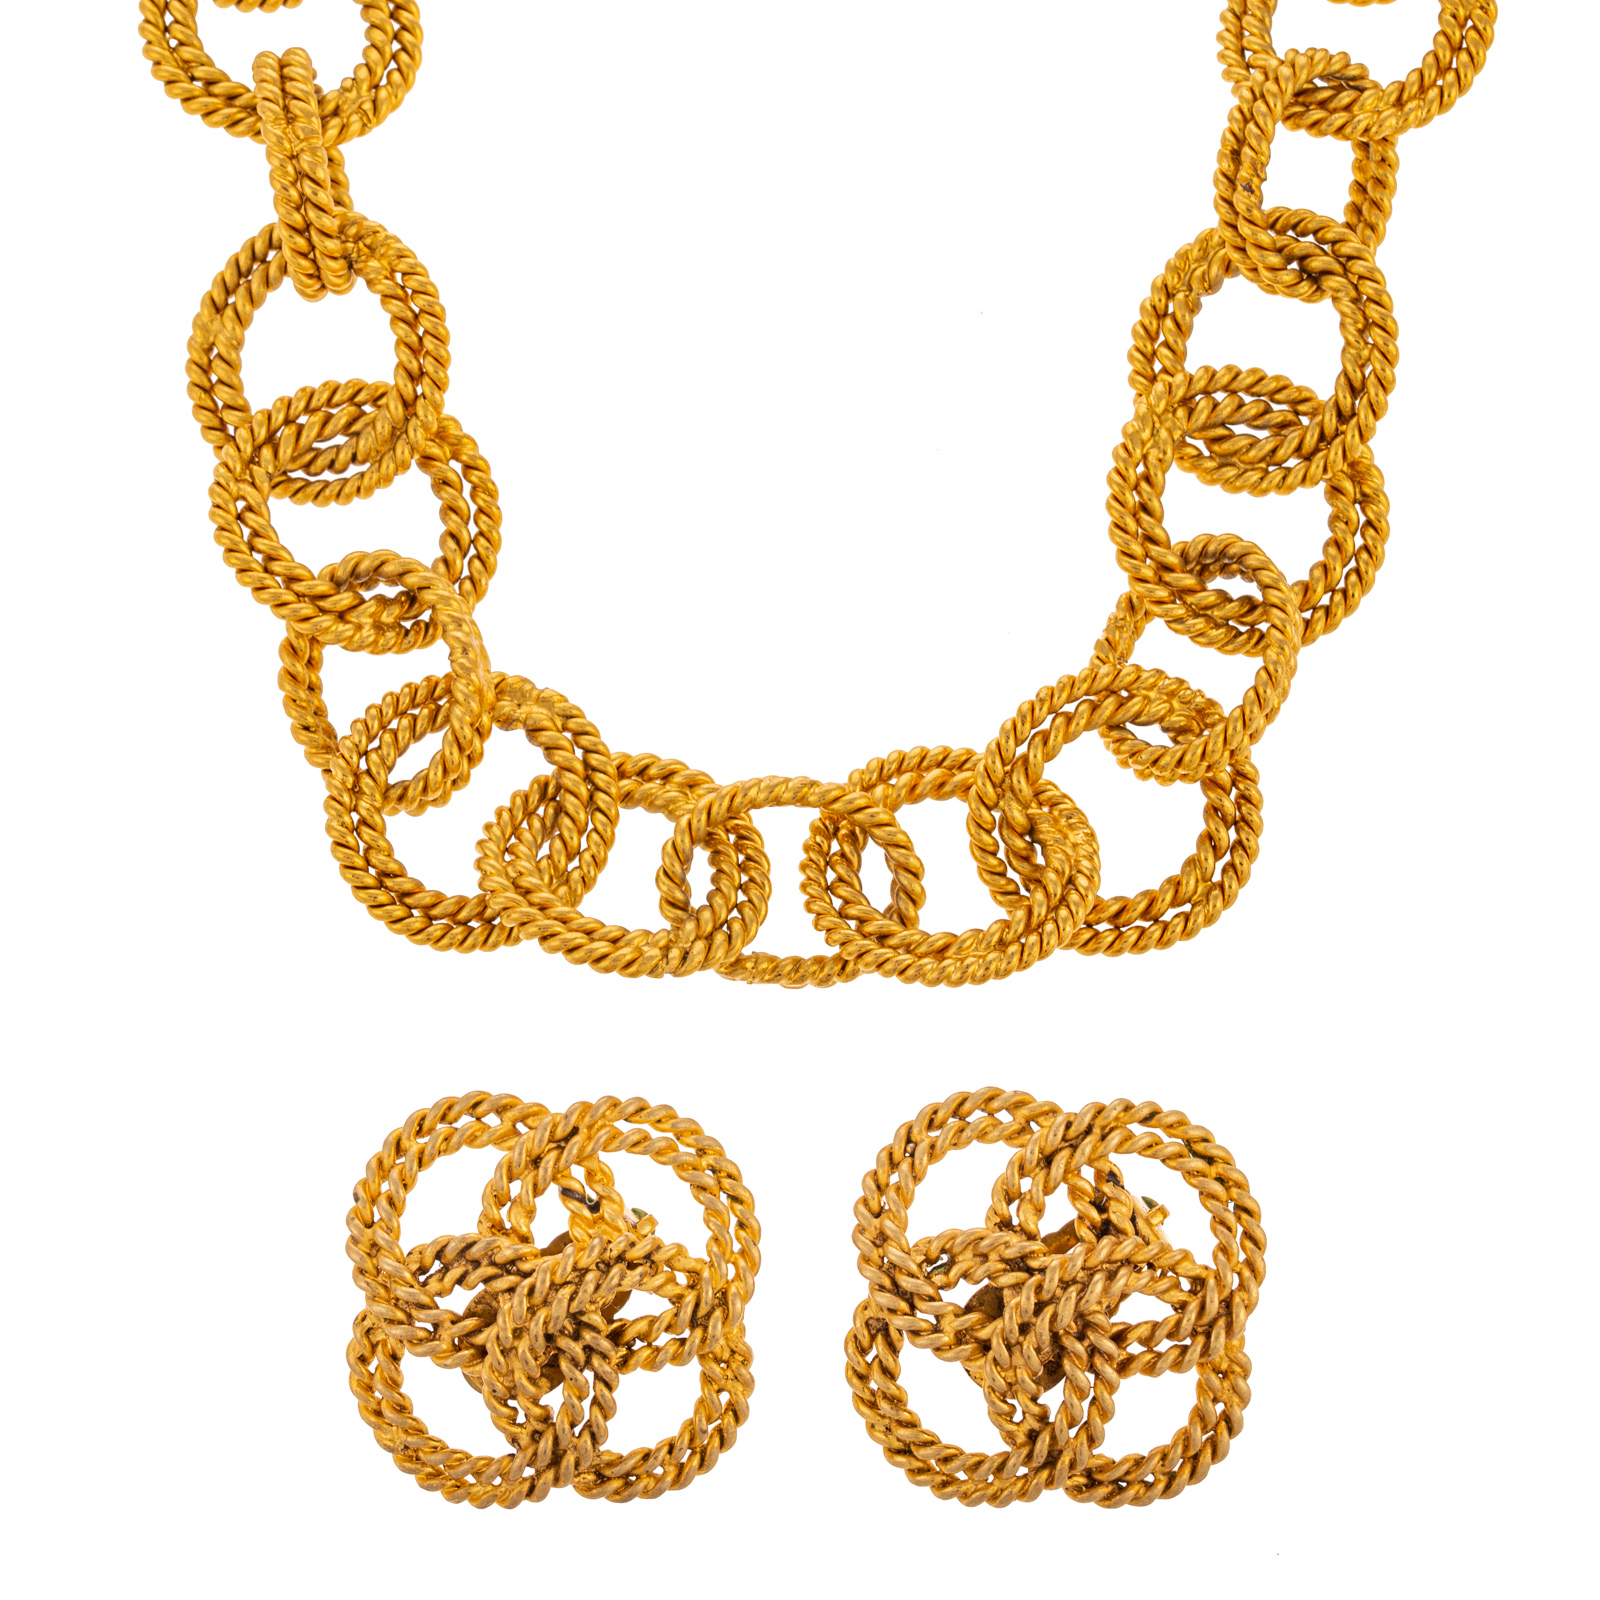 A CHANEL ROPE LINK NECKLACE EARRINGS 33861c